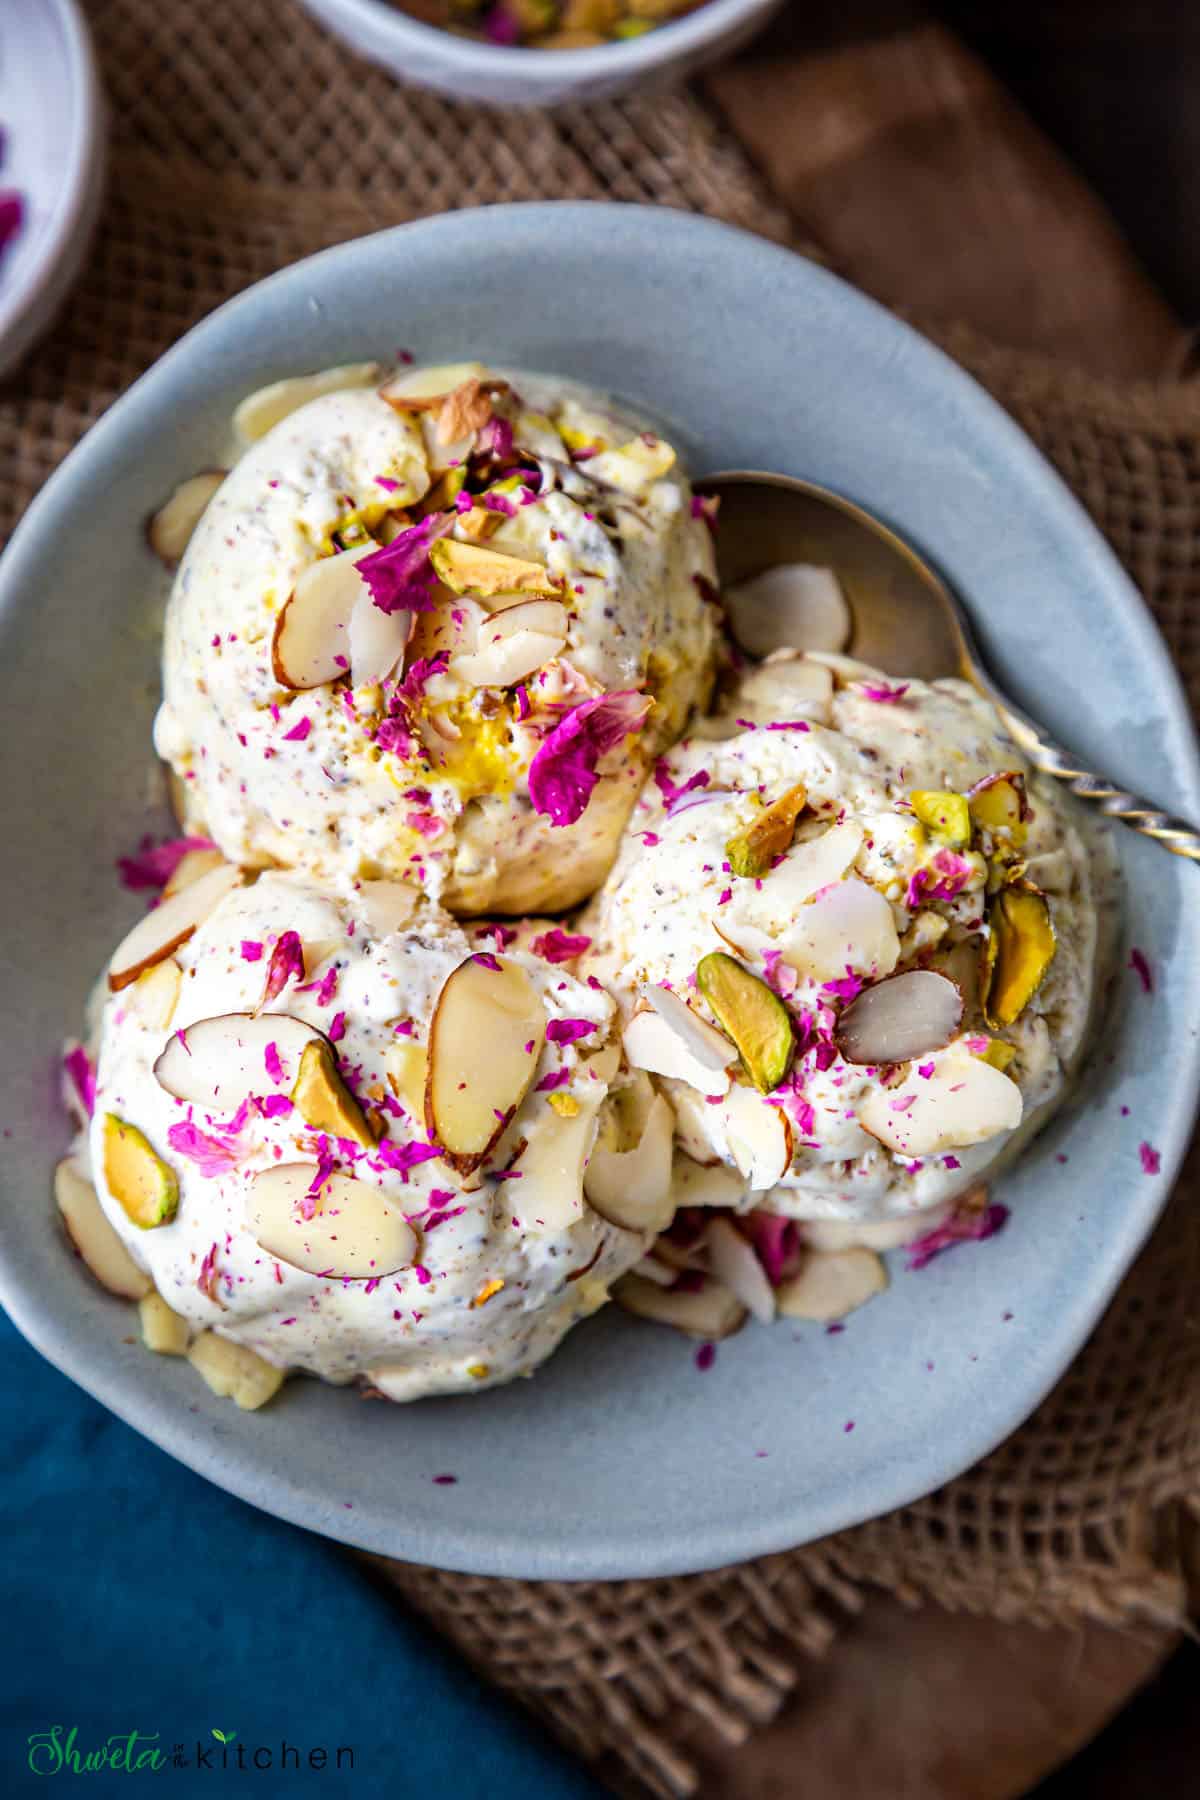 three scoops of thandai ice cream garbished with sliced almonds and dried rose petals in a blue bowl